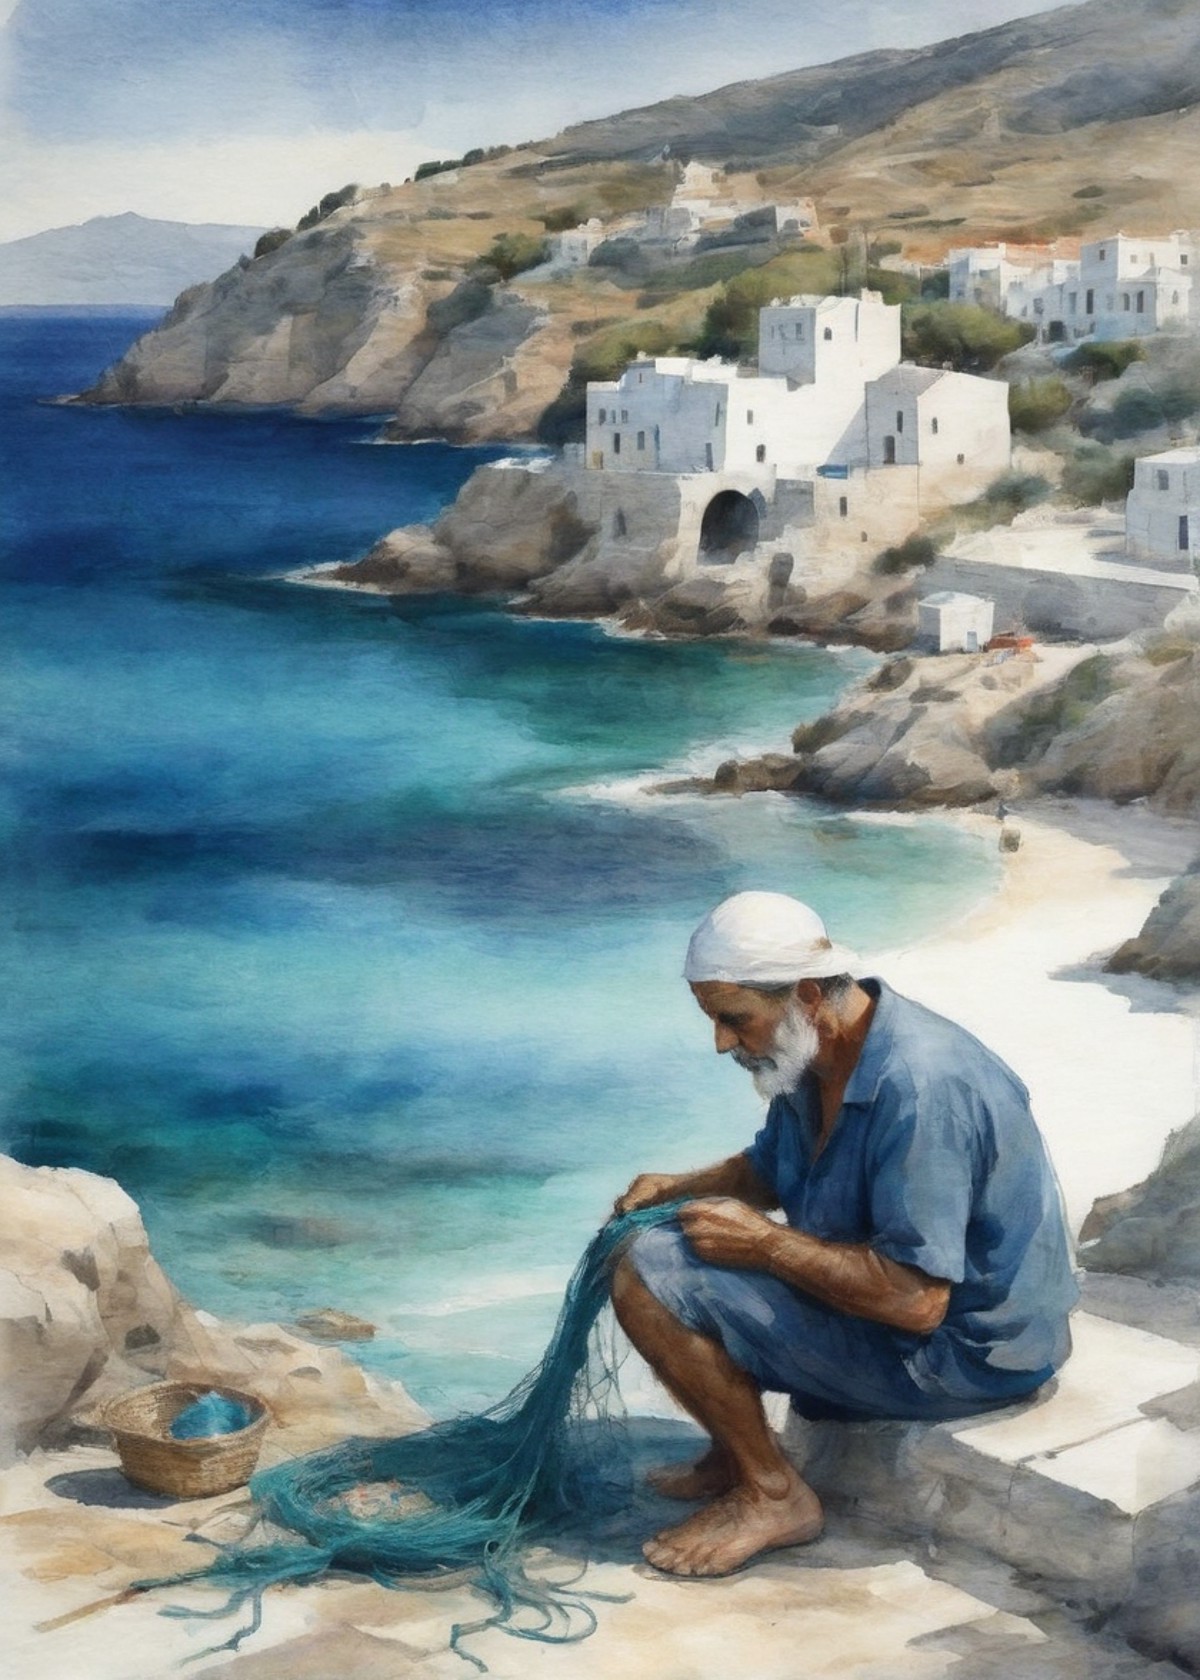 A Greek fisherman mending his nets by the azure waters of the Mediterranean Sea